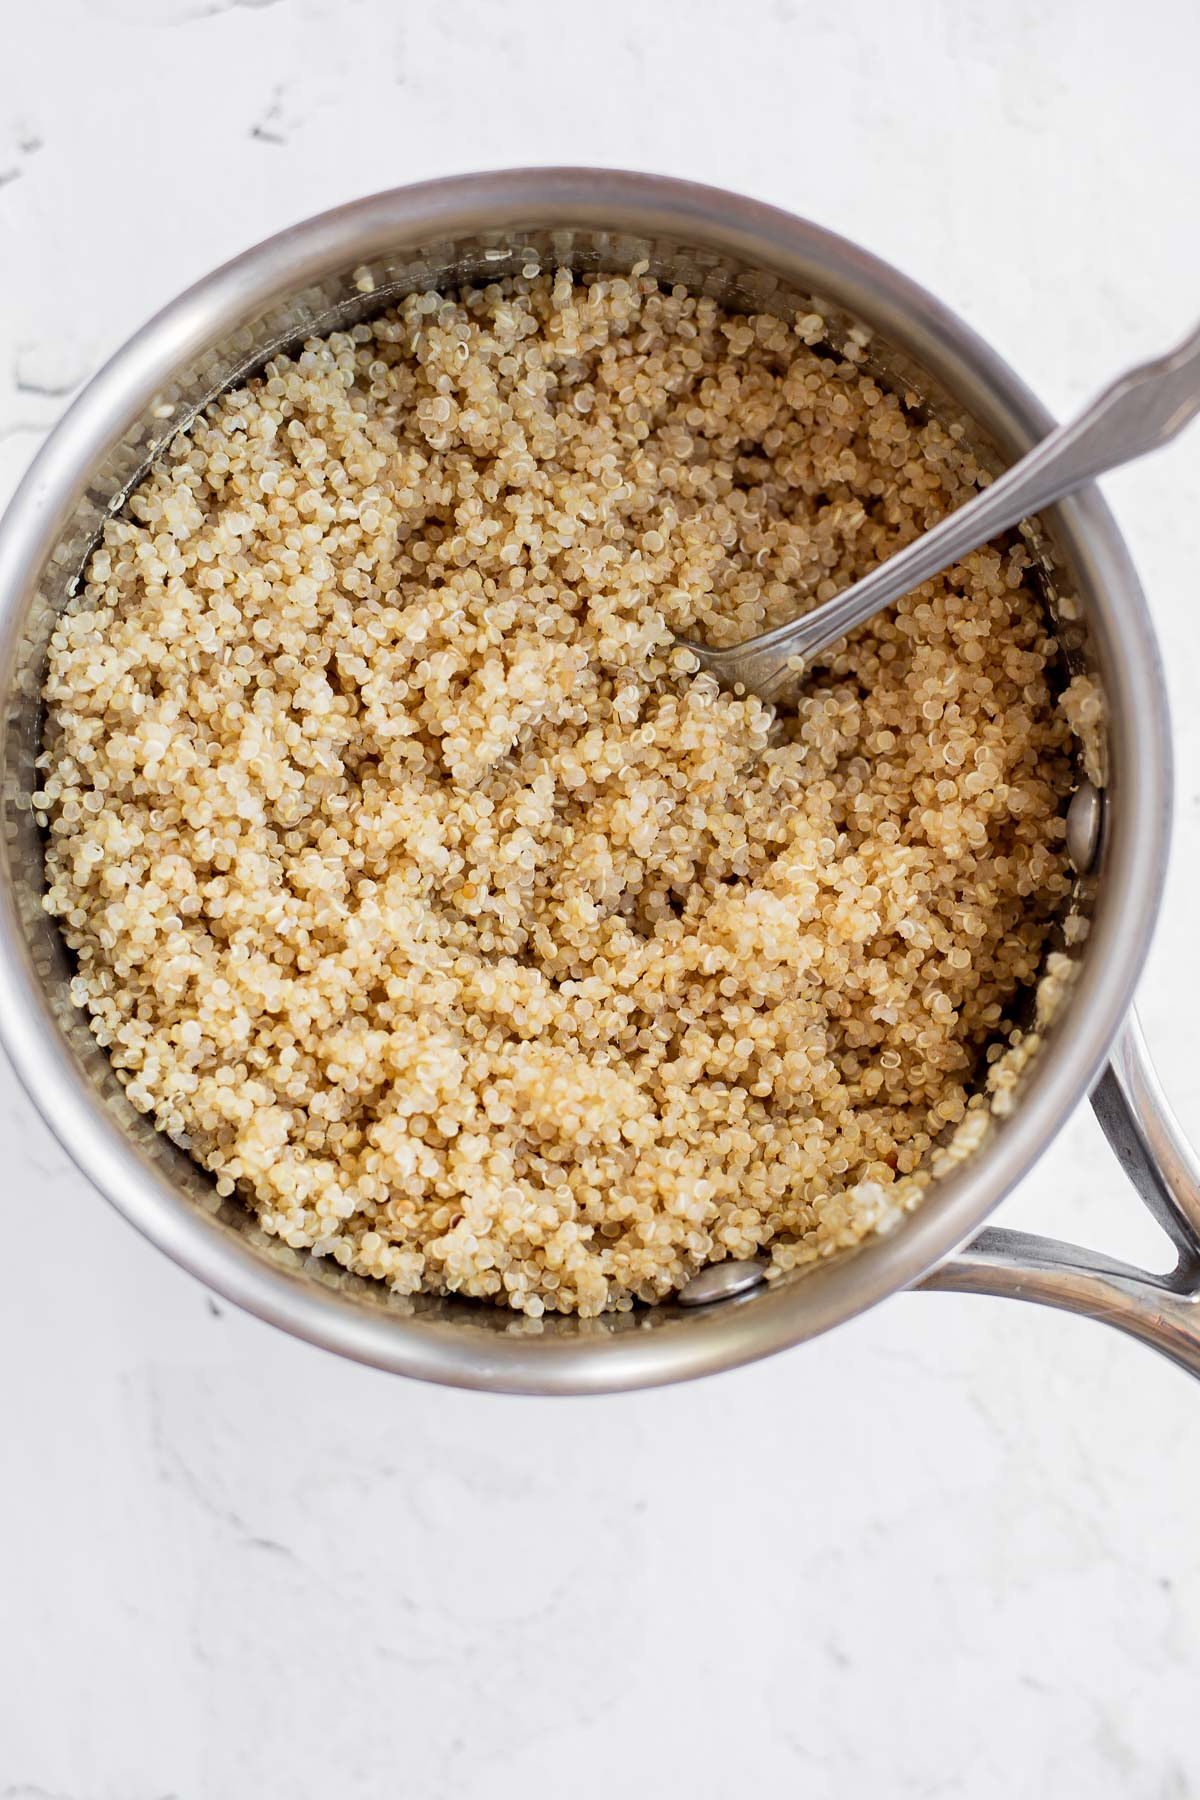 Cooked quinoa in a saucepan with a fork.